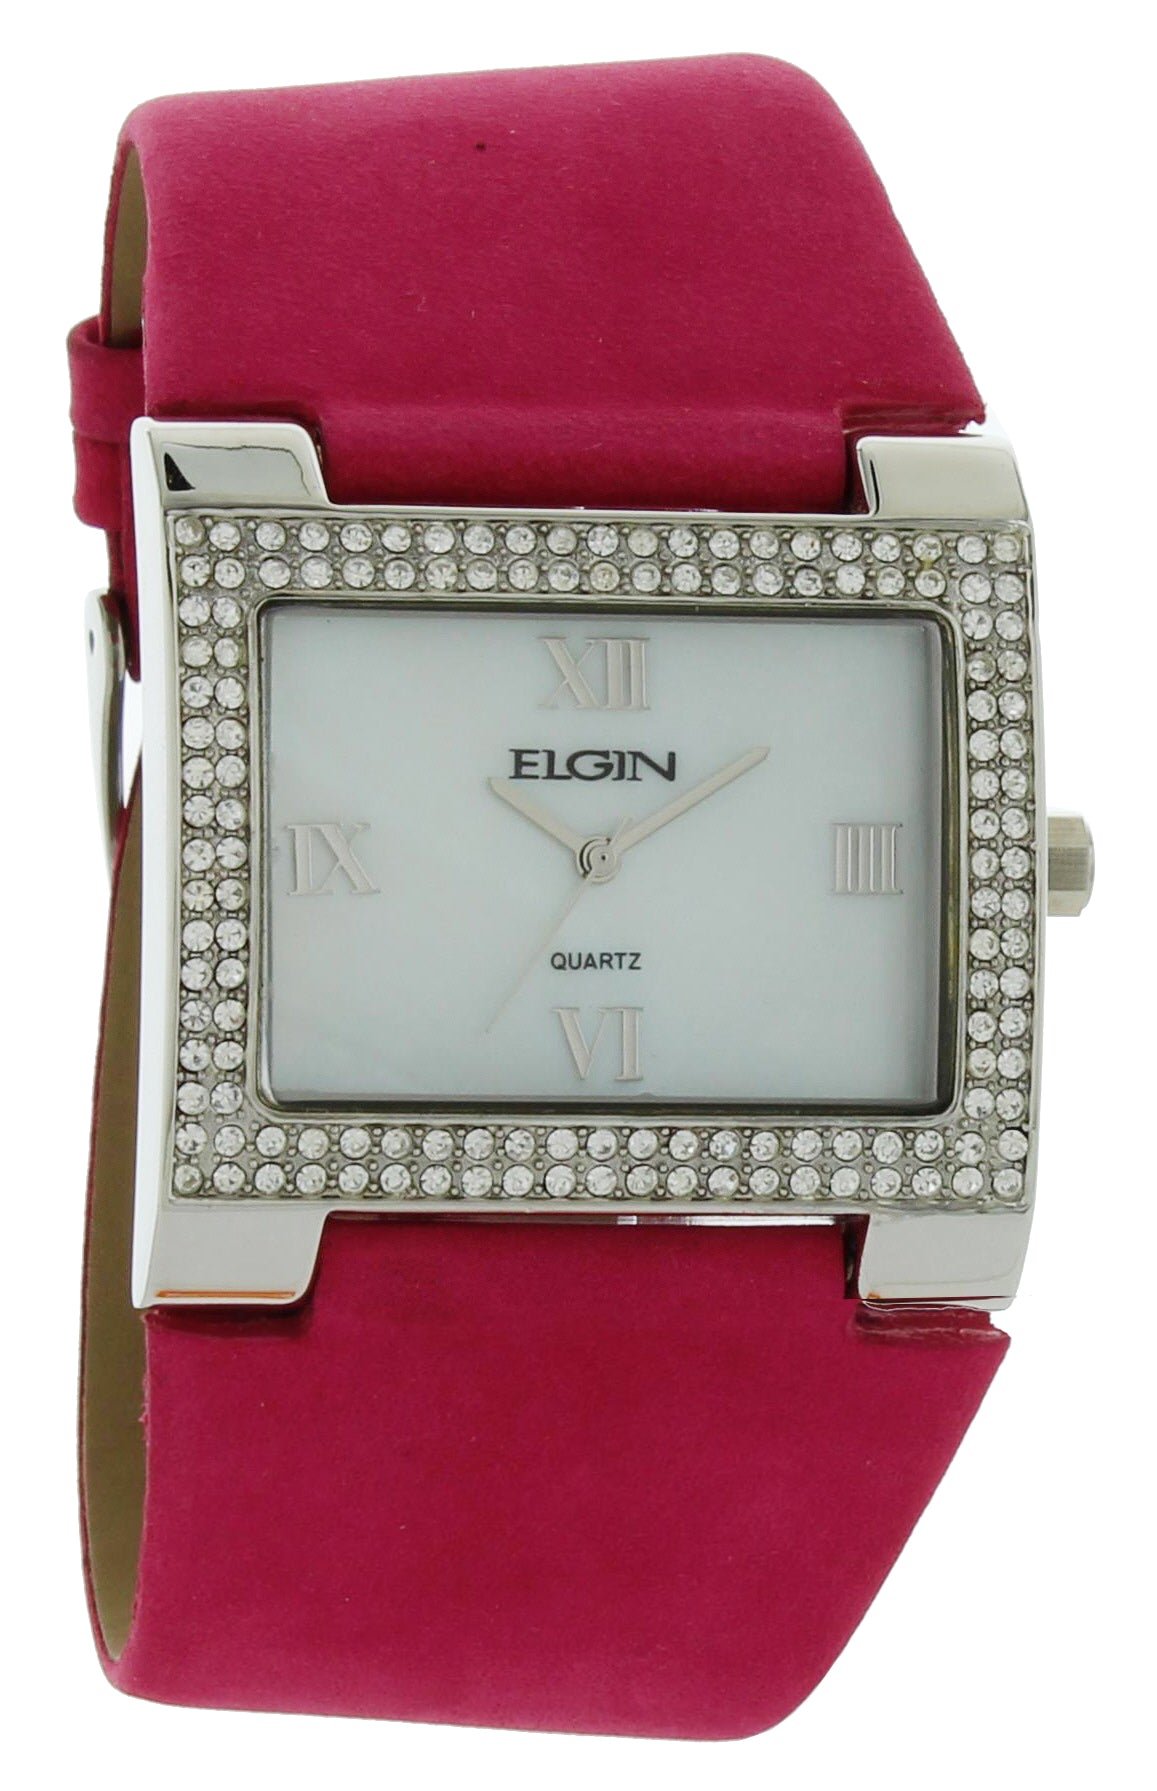 Model: Women's Elgin Watch with Stone Case and White Dial with Hot Pink Leather Strap